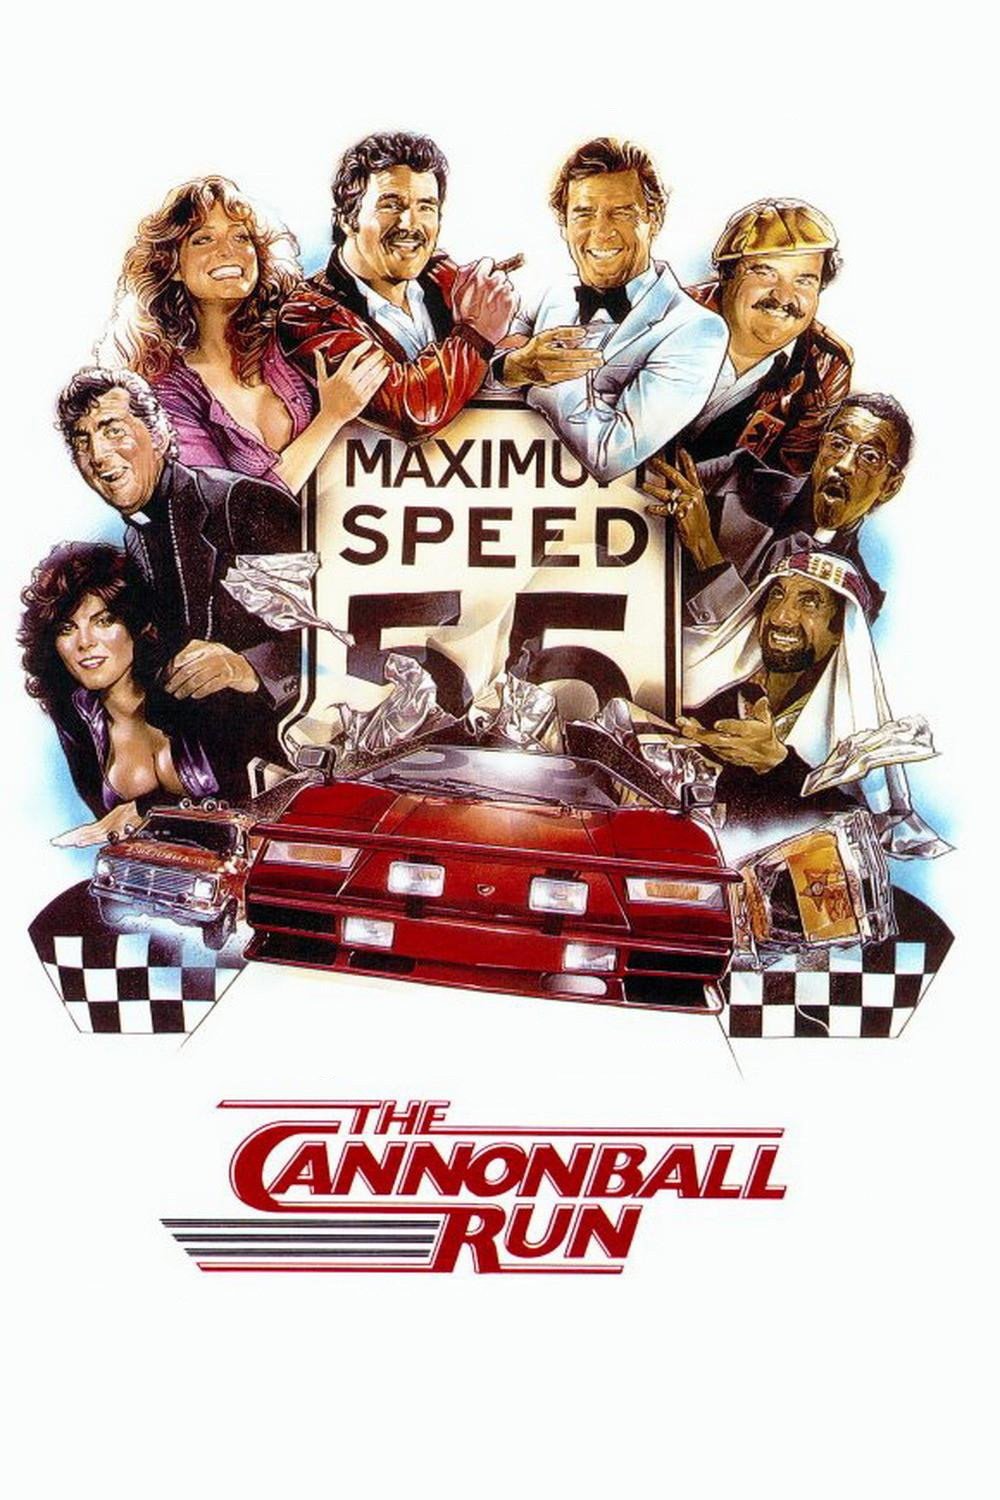 Poster for the movie "The Cannonball Run"